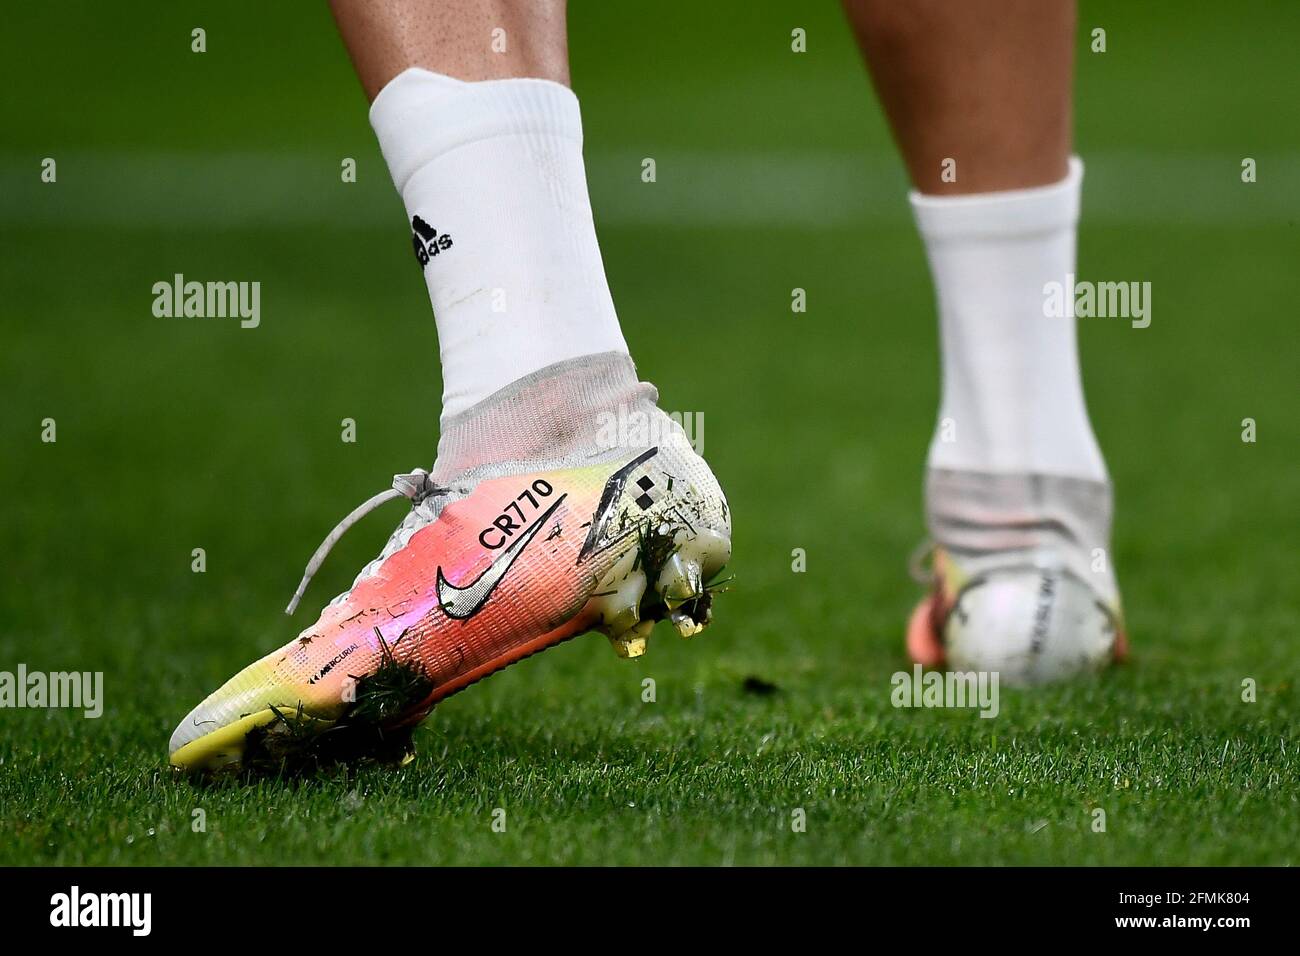 Cristiano Ronaldo Boots High Resolution Stock Photography and Images - Alamy